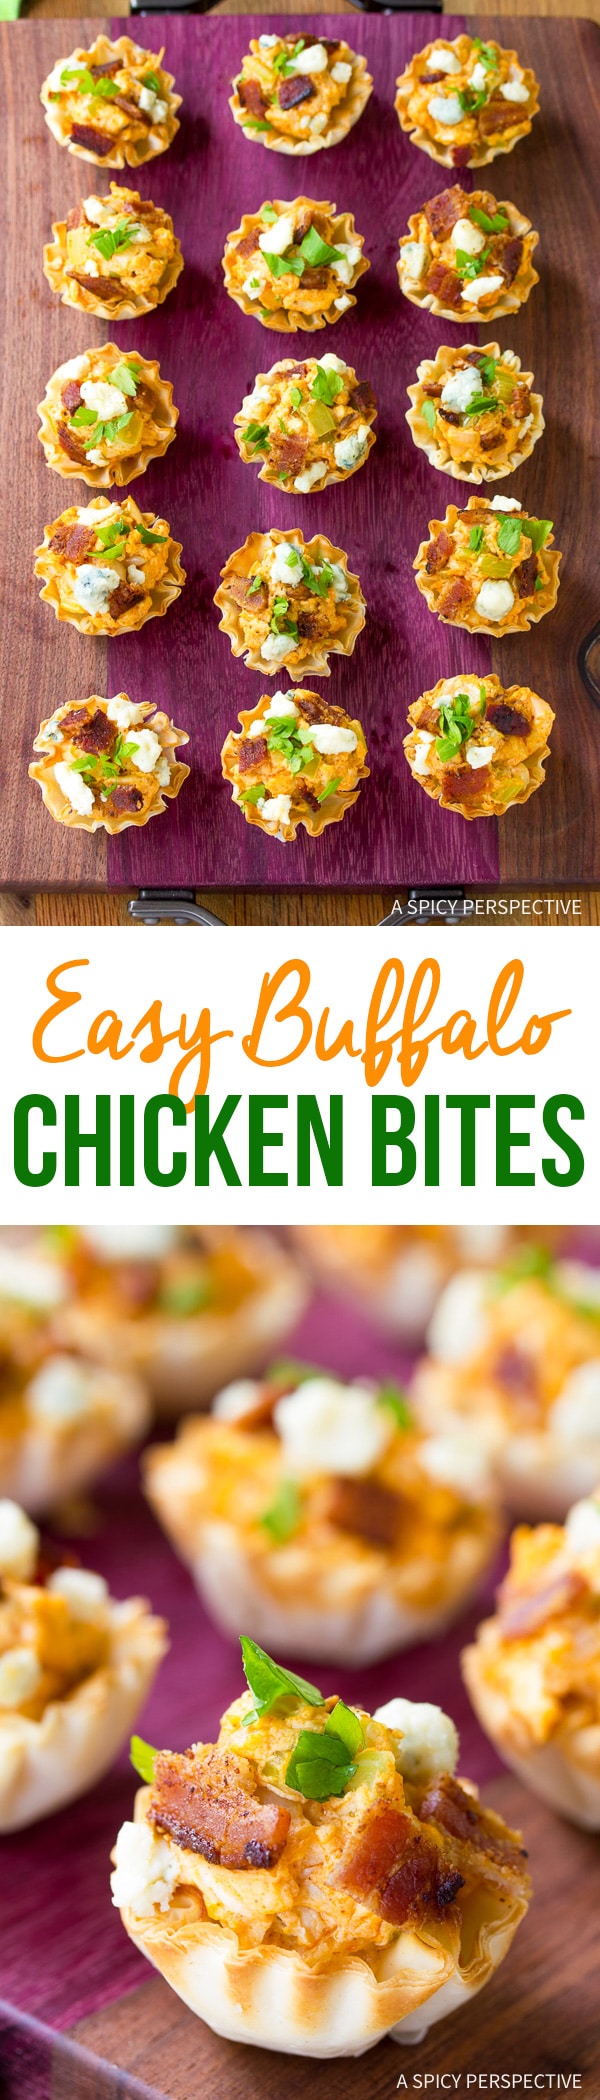 Looking for quick and tasty party snacks? Look no further. These itty bitty Easy Buffalo Chicken Bites are just the thing to serve at your game-day party!